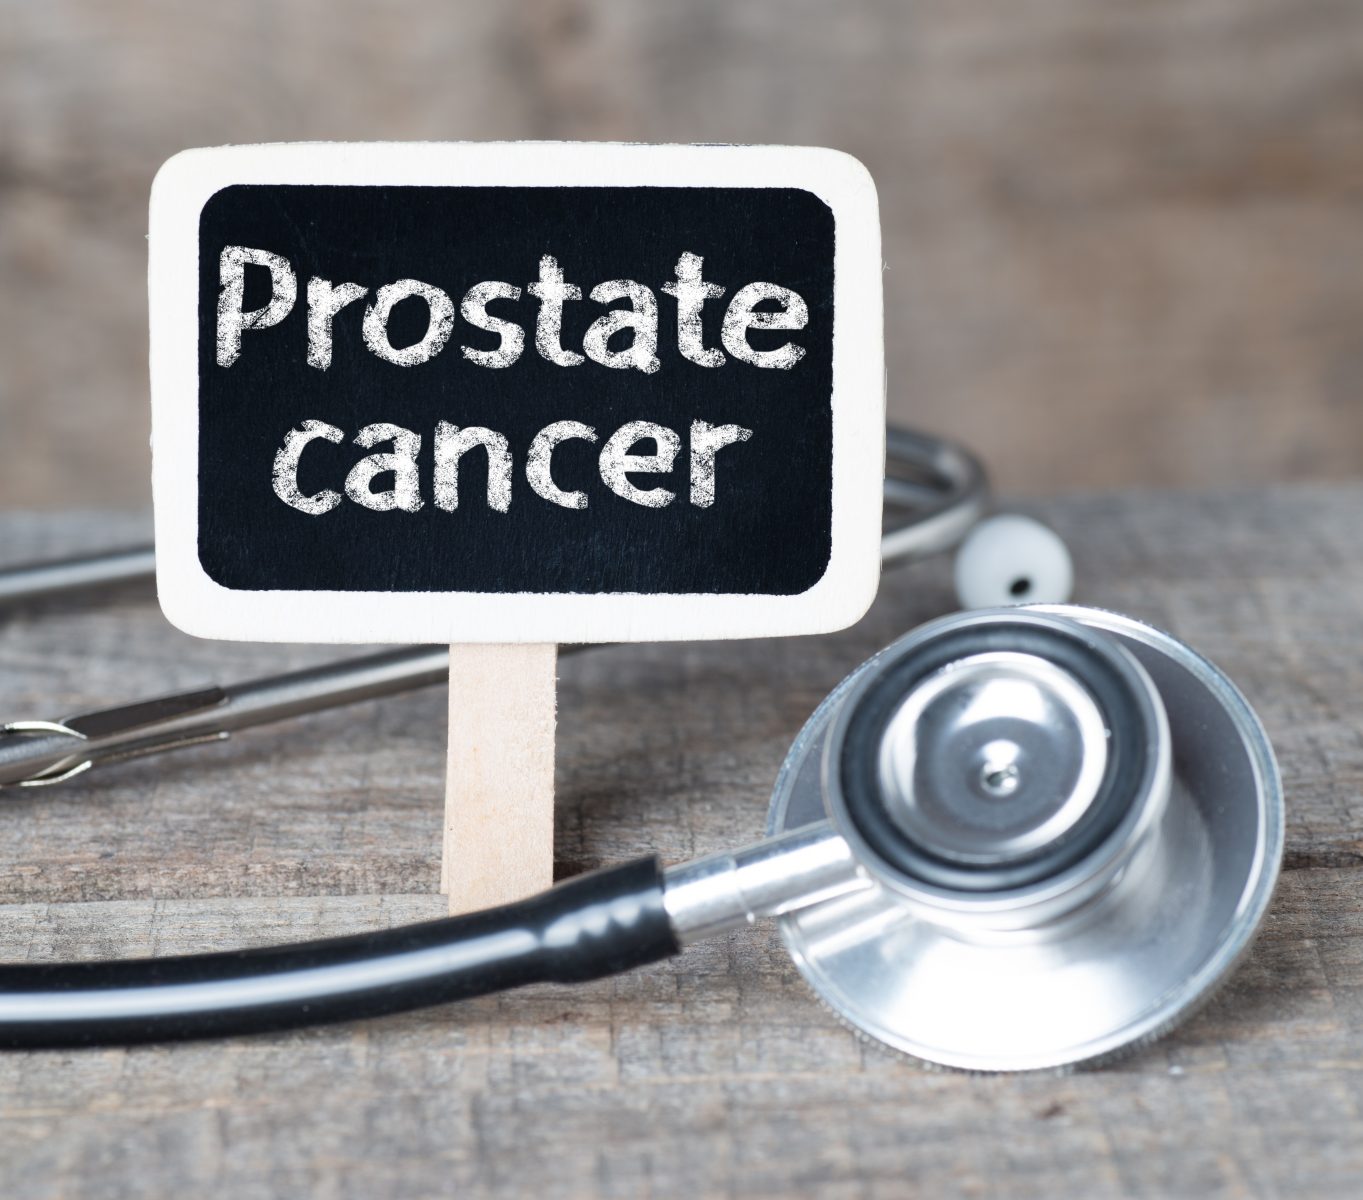 Prostate Cancer Combo Therapy Starting a Phase 3 Global Trial